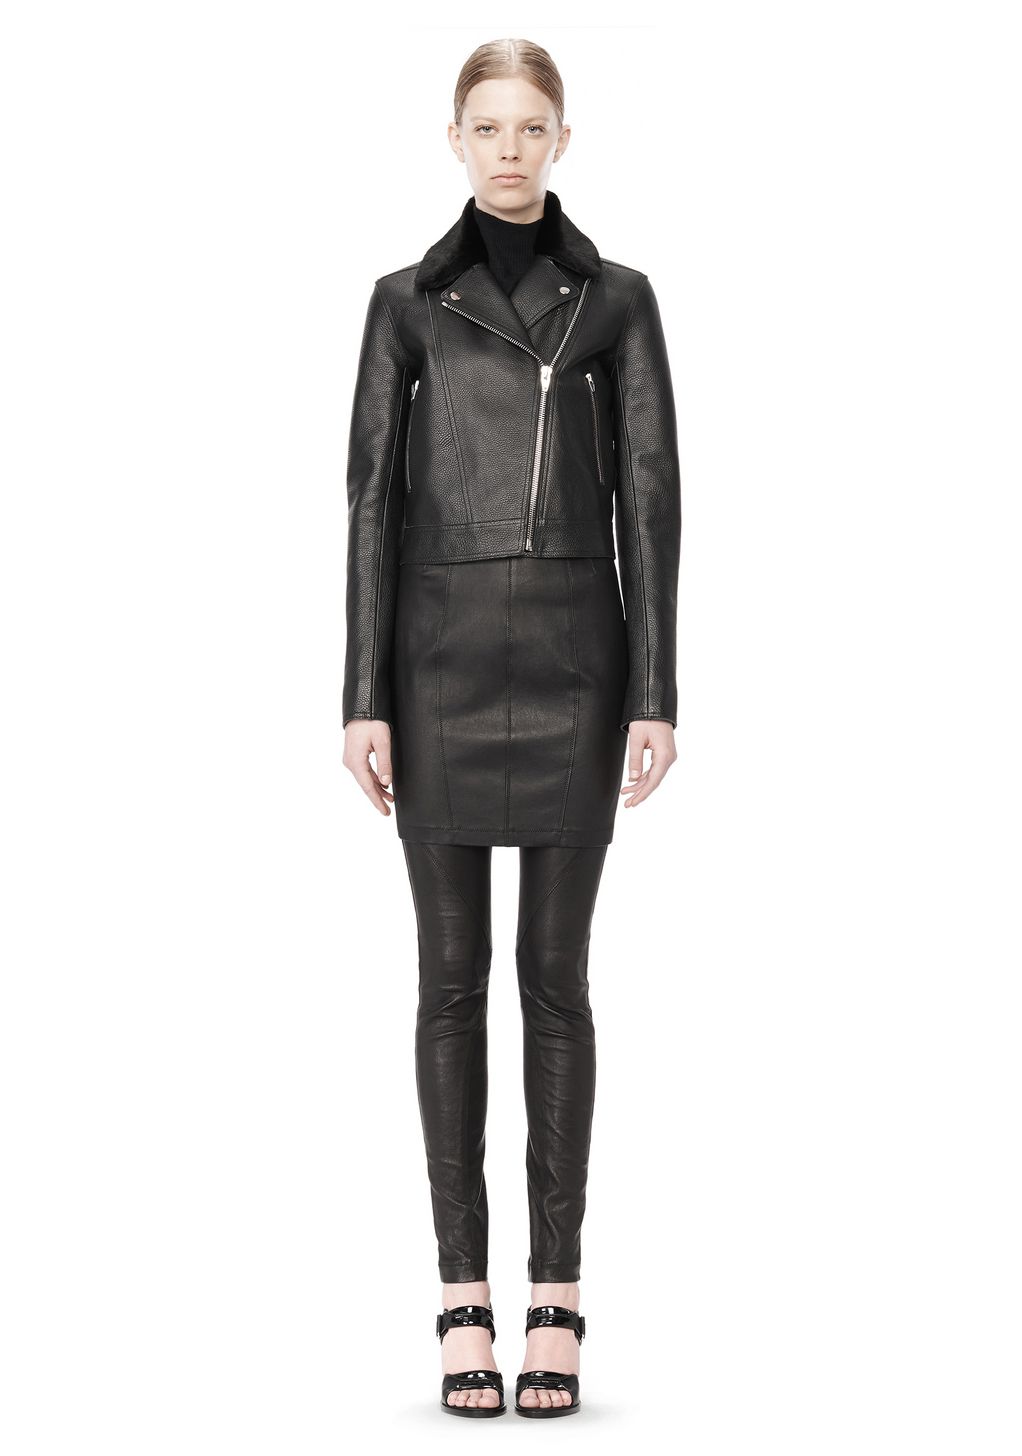 Alexander Wang ‎PEBBLED LEATHER MOTORCYCLE JACKET ‎ ‎Jacket‎ | Official ...